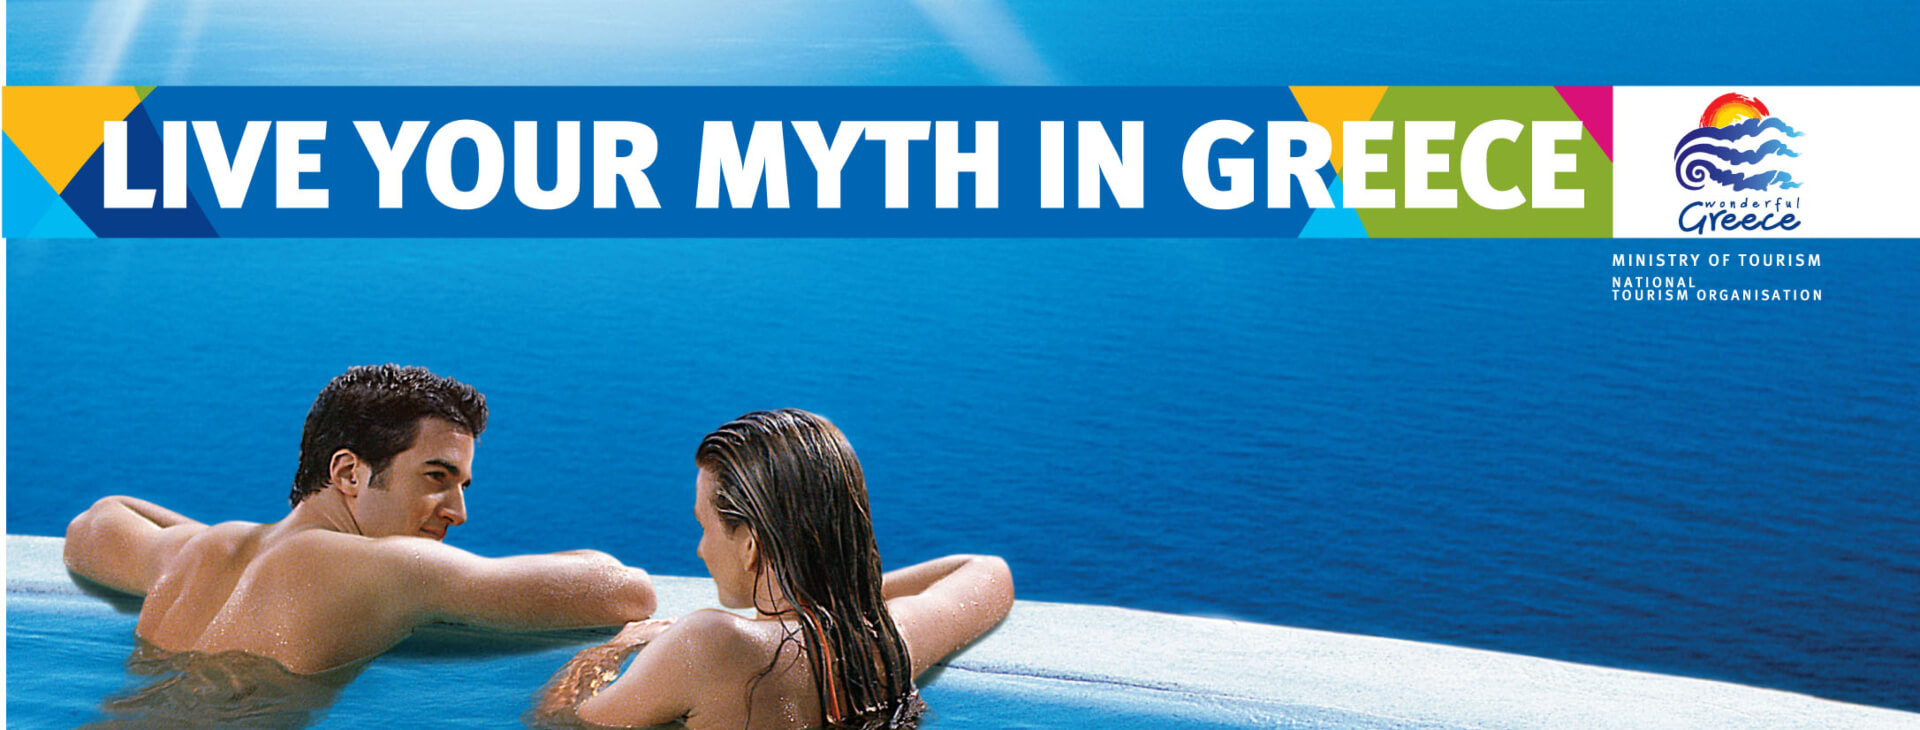 Live Your Myth in Greece